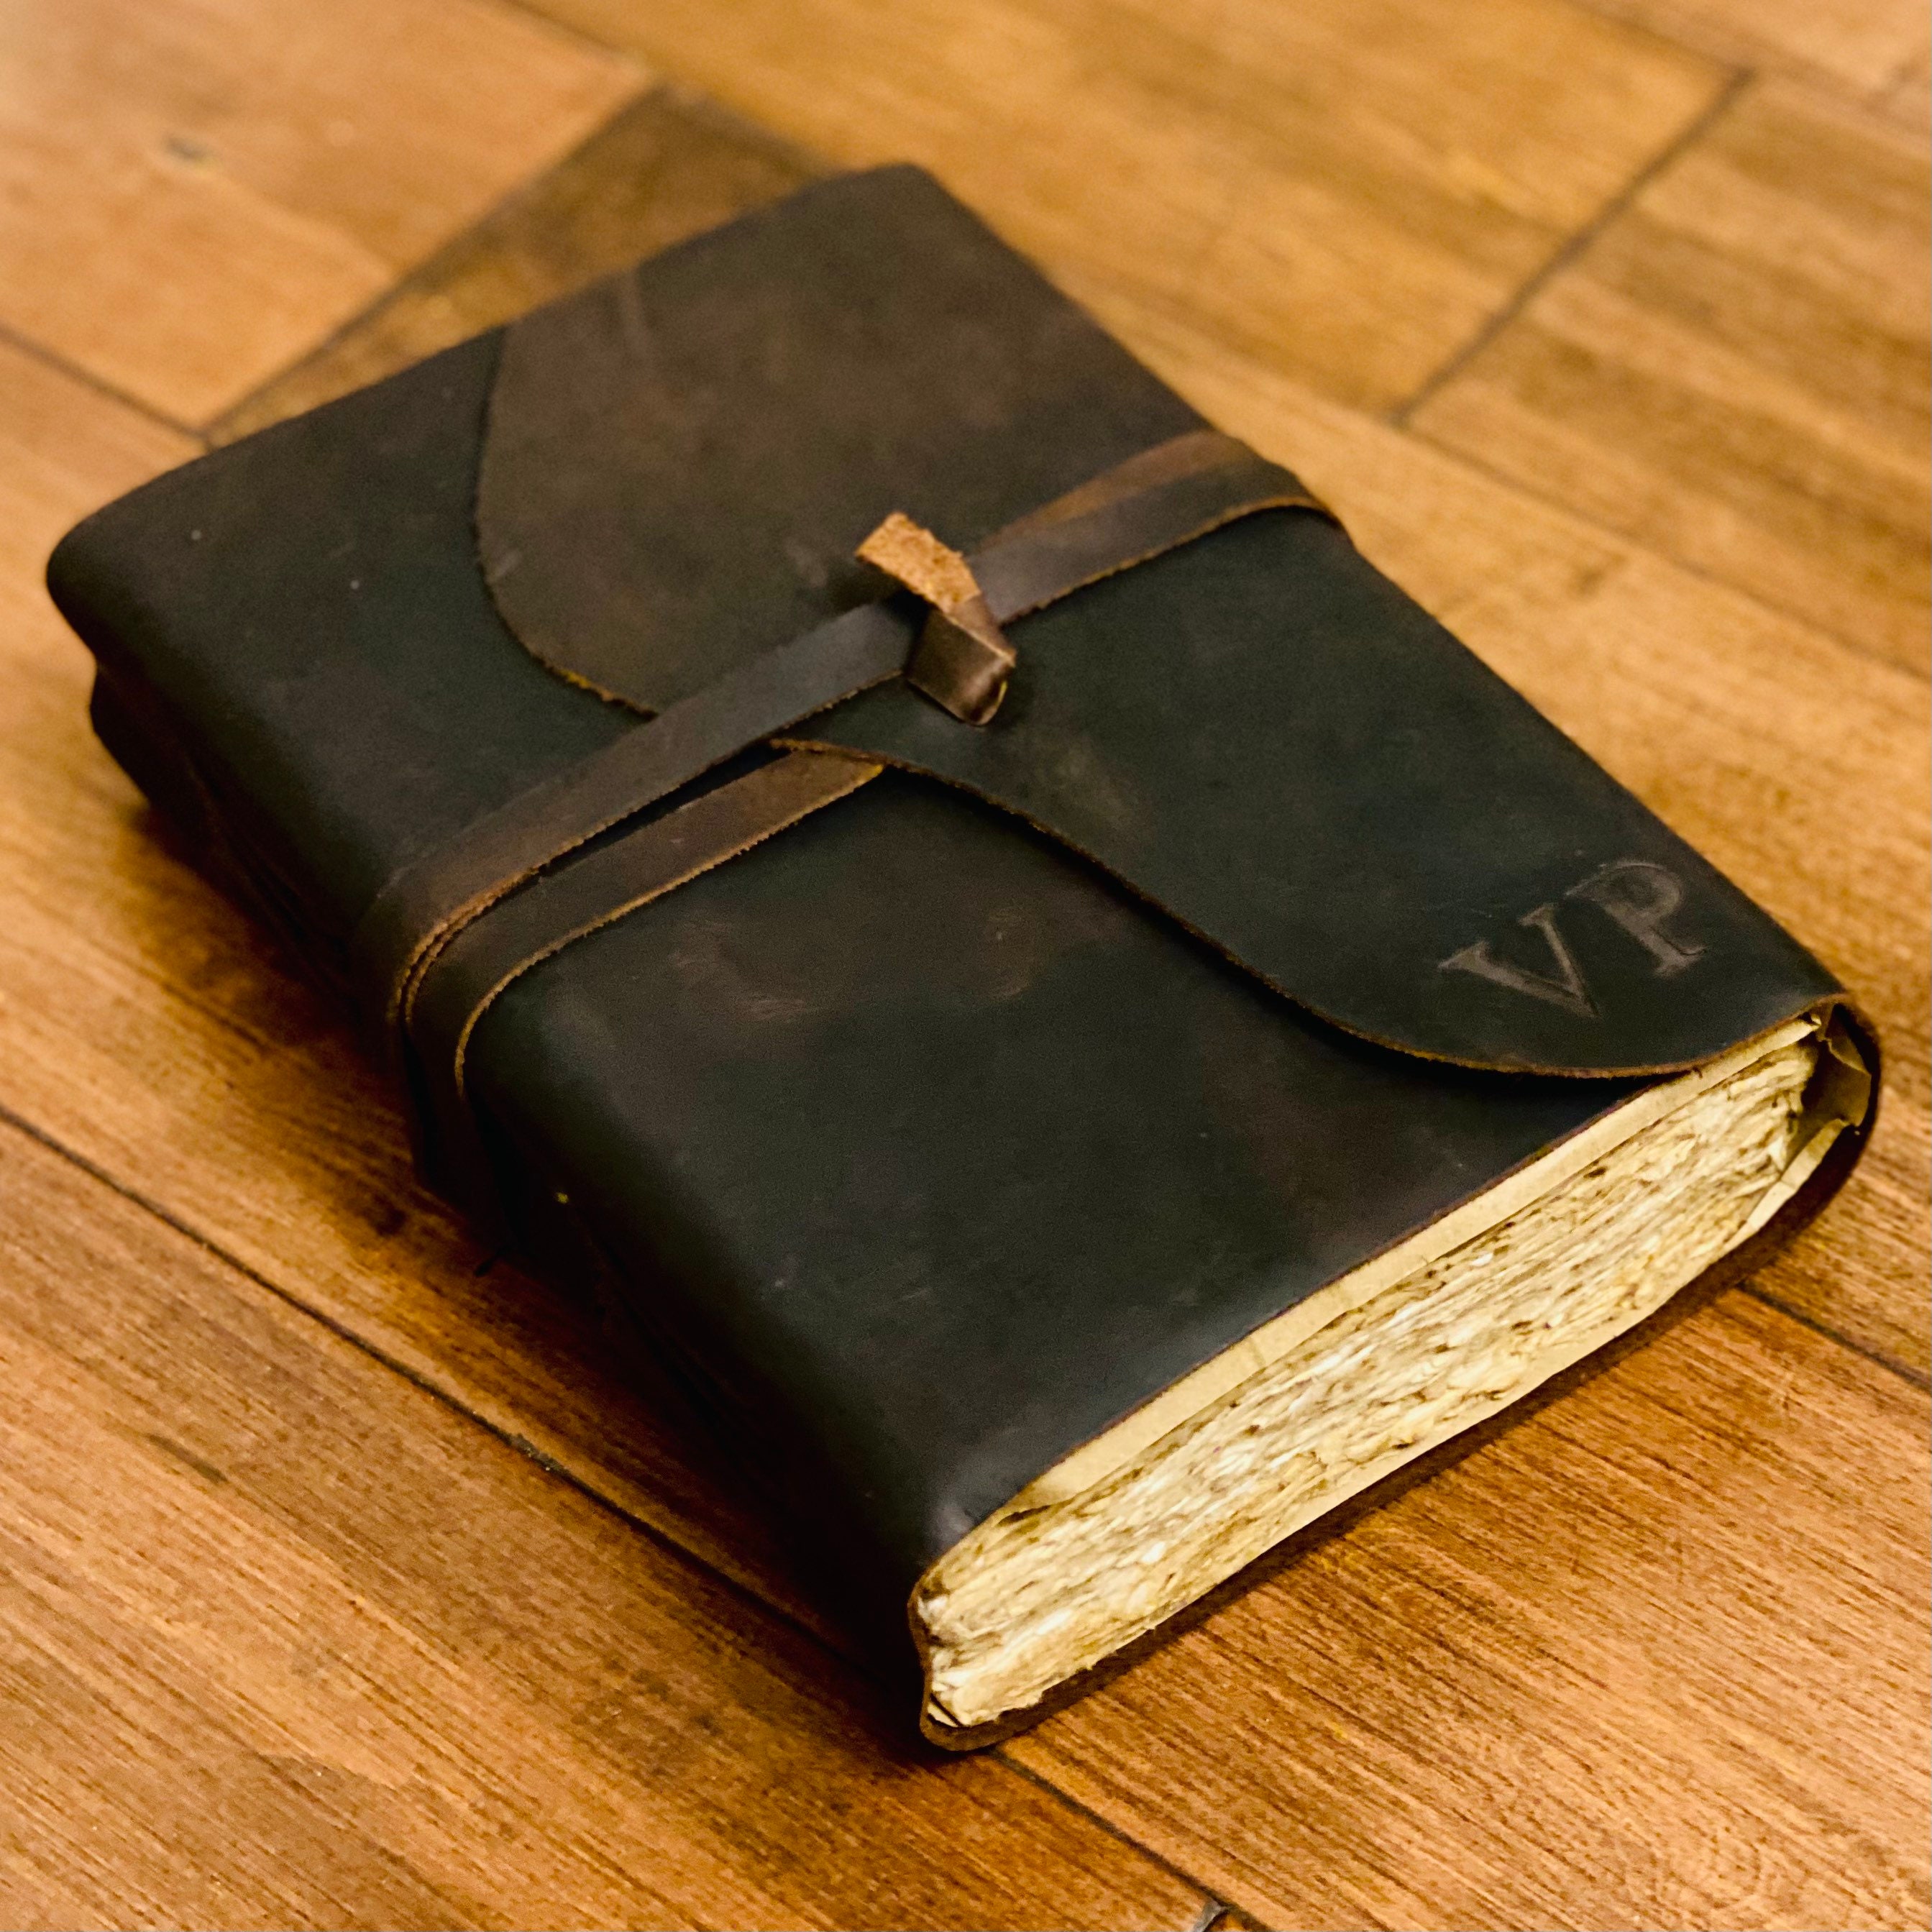 Leather Journal Notebook - Rustic Handmade Vintage Leather Bound Journals  for Men and Women - Leather Craft Unlined Paper 300 Pages, Leather Book